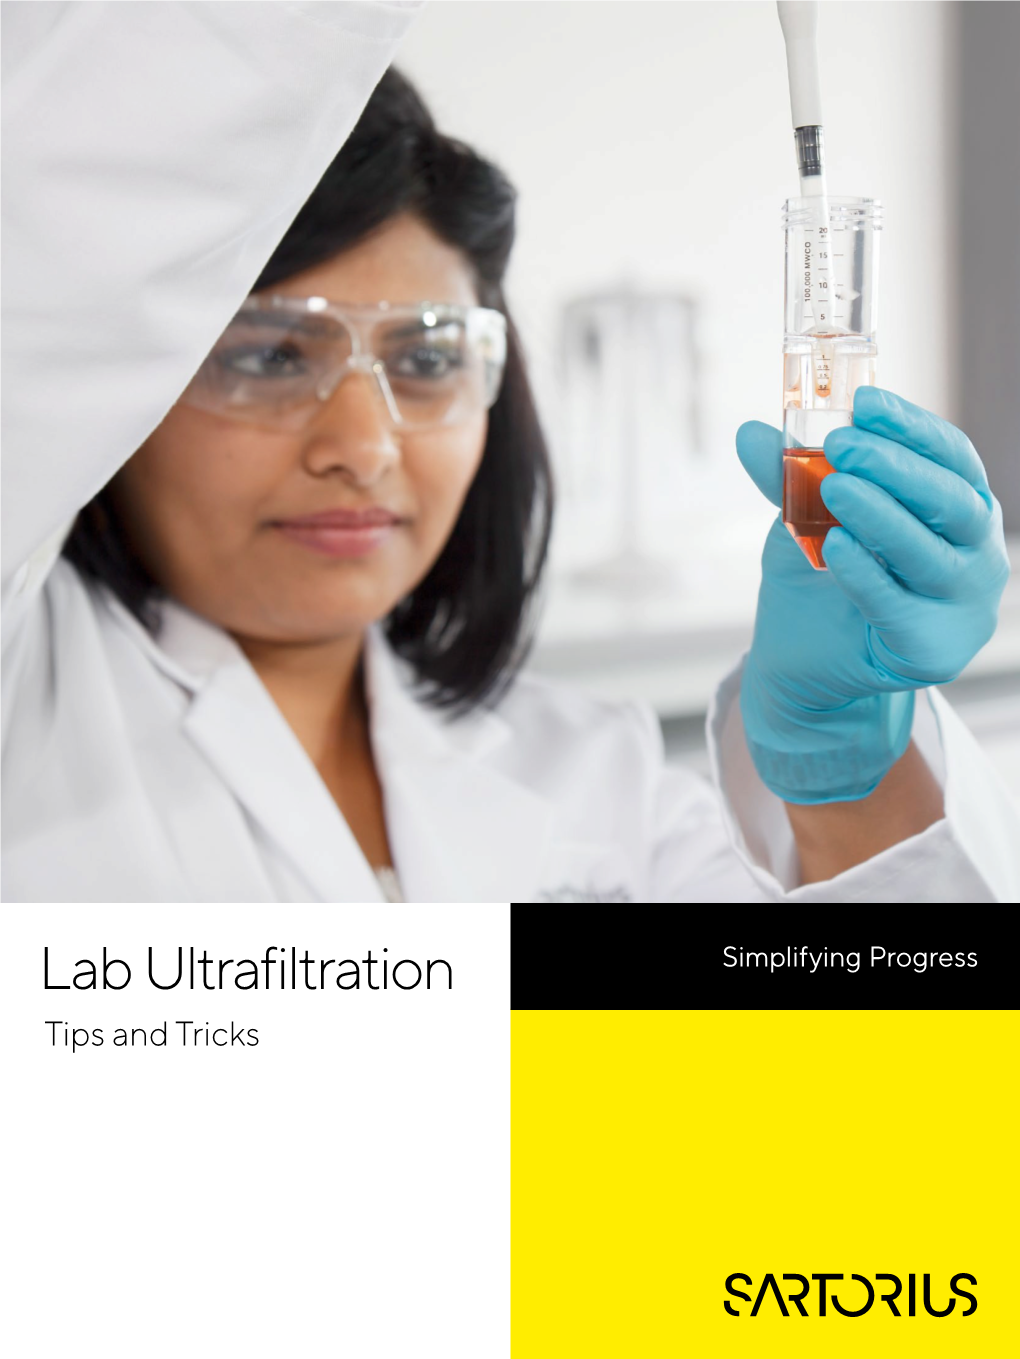 Lab Ultrafiltration Tips and Tricks Build Knowledge Though Experiments